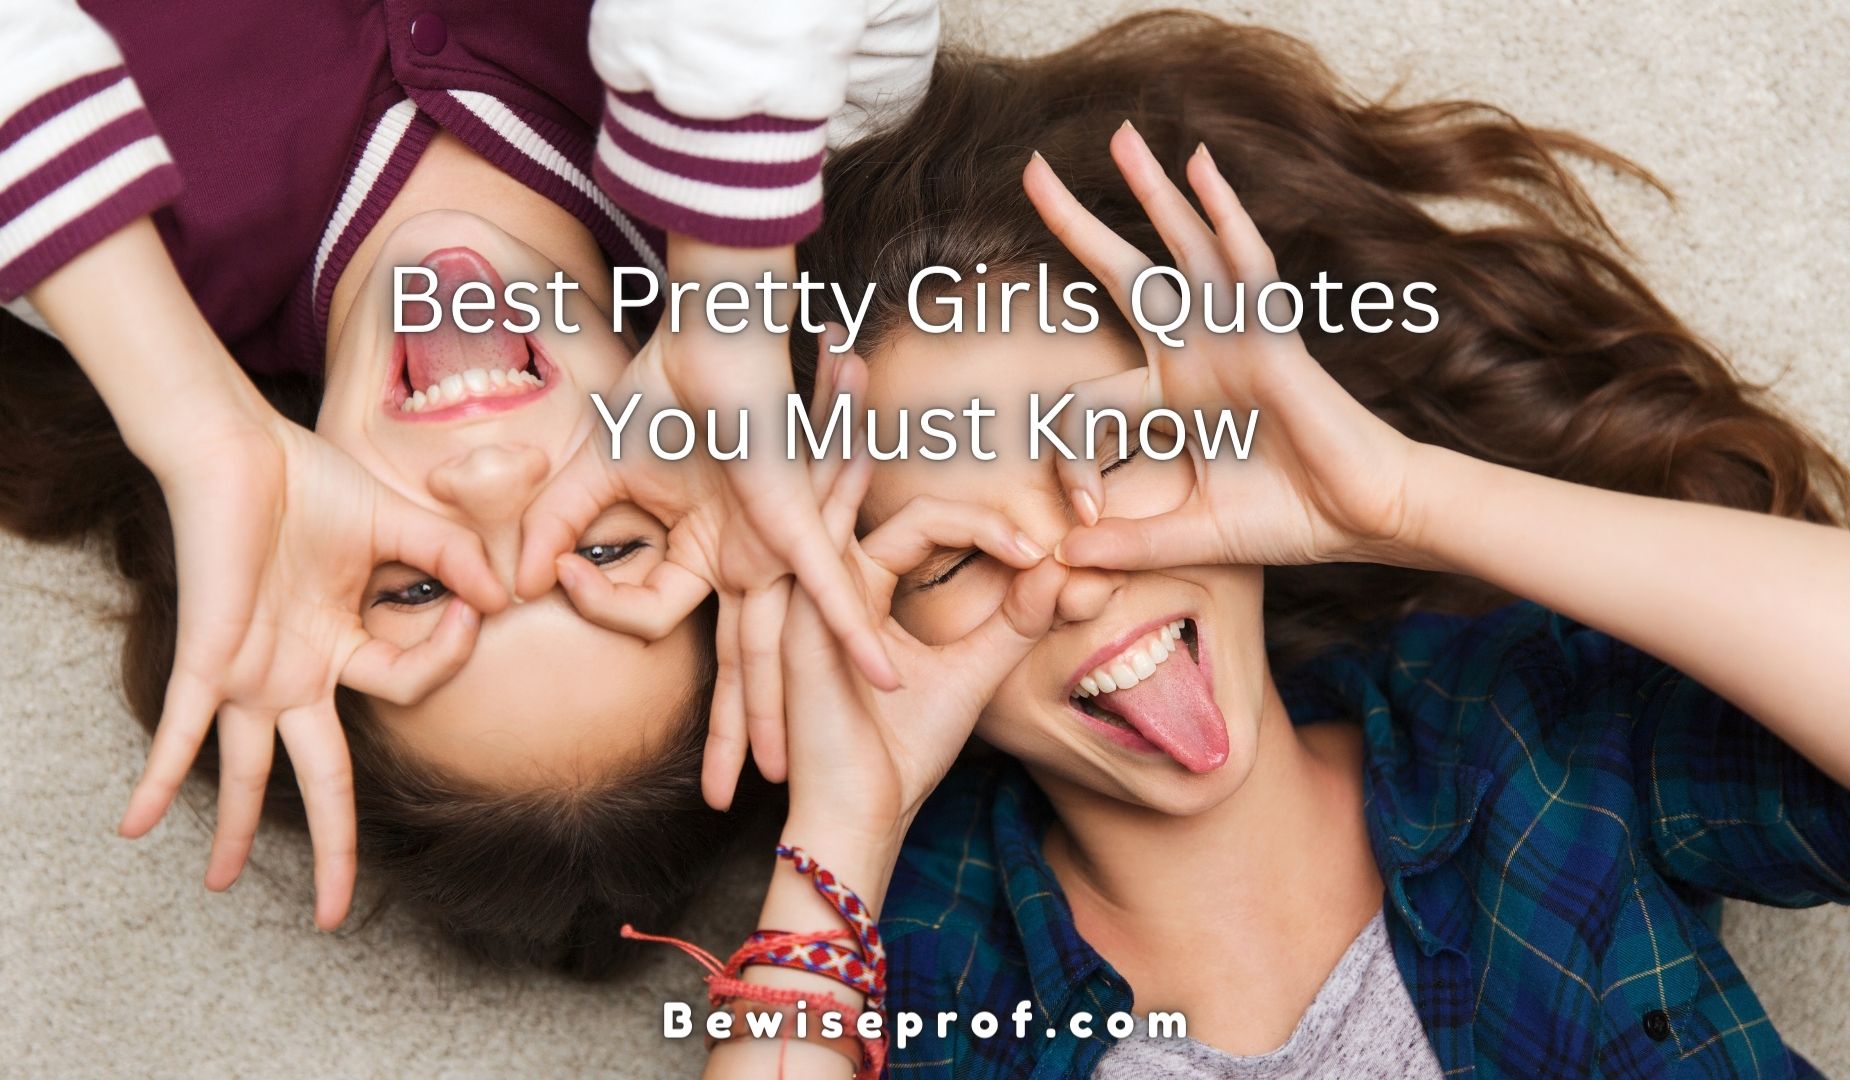 Best Pretty Girls Quotes You Must Know